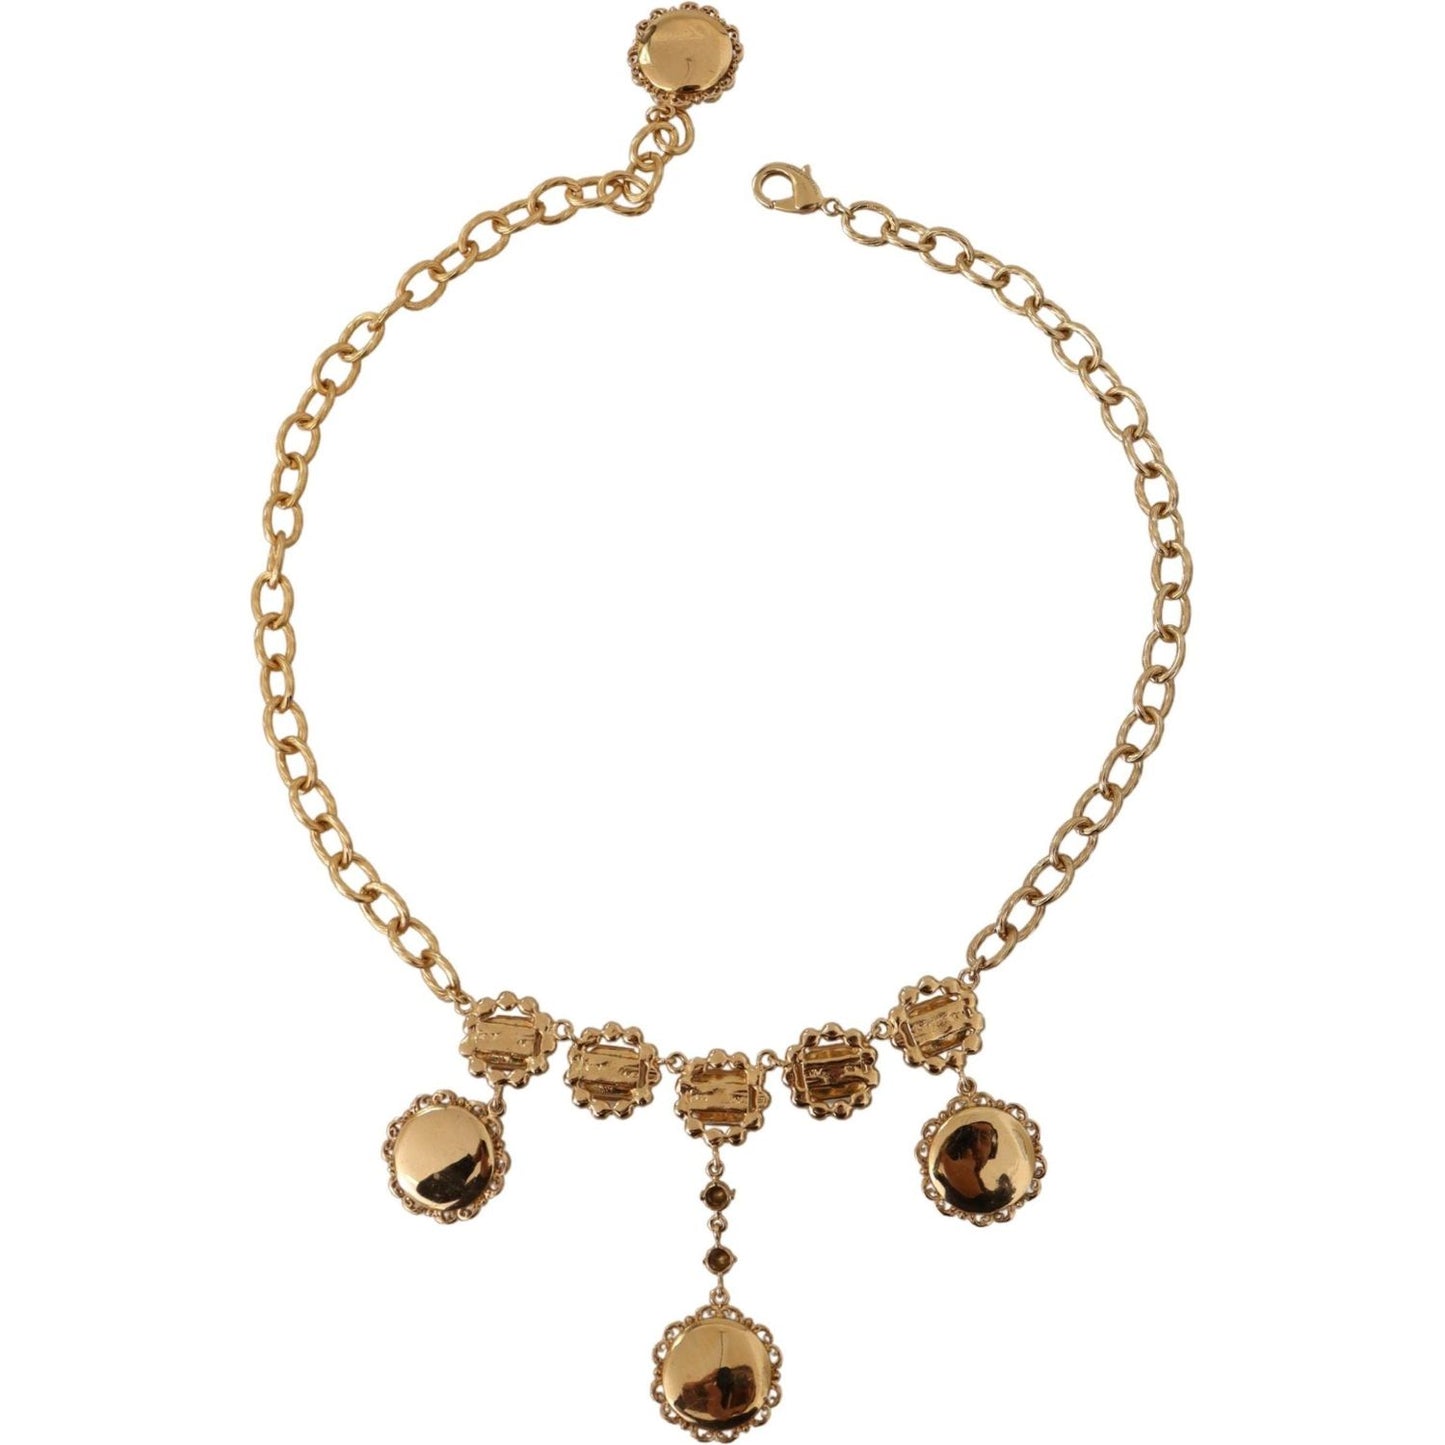 Dolce & Gabbana Elegant Timeless Statement Necklace gold-clock-statement-crystal-chain-necklace WOMAN NECKLACE IMG_2026-scaled-79a68e89-ad1.jpg